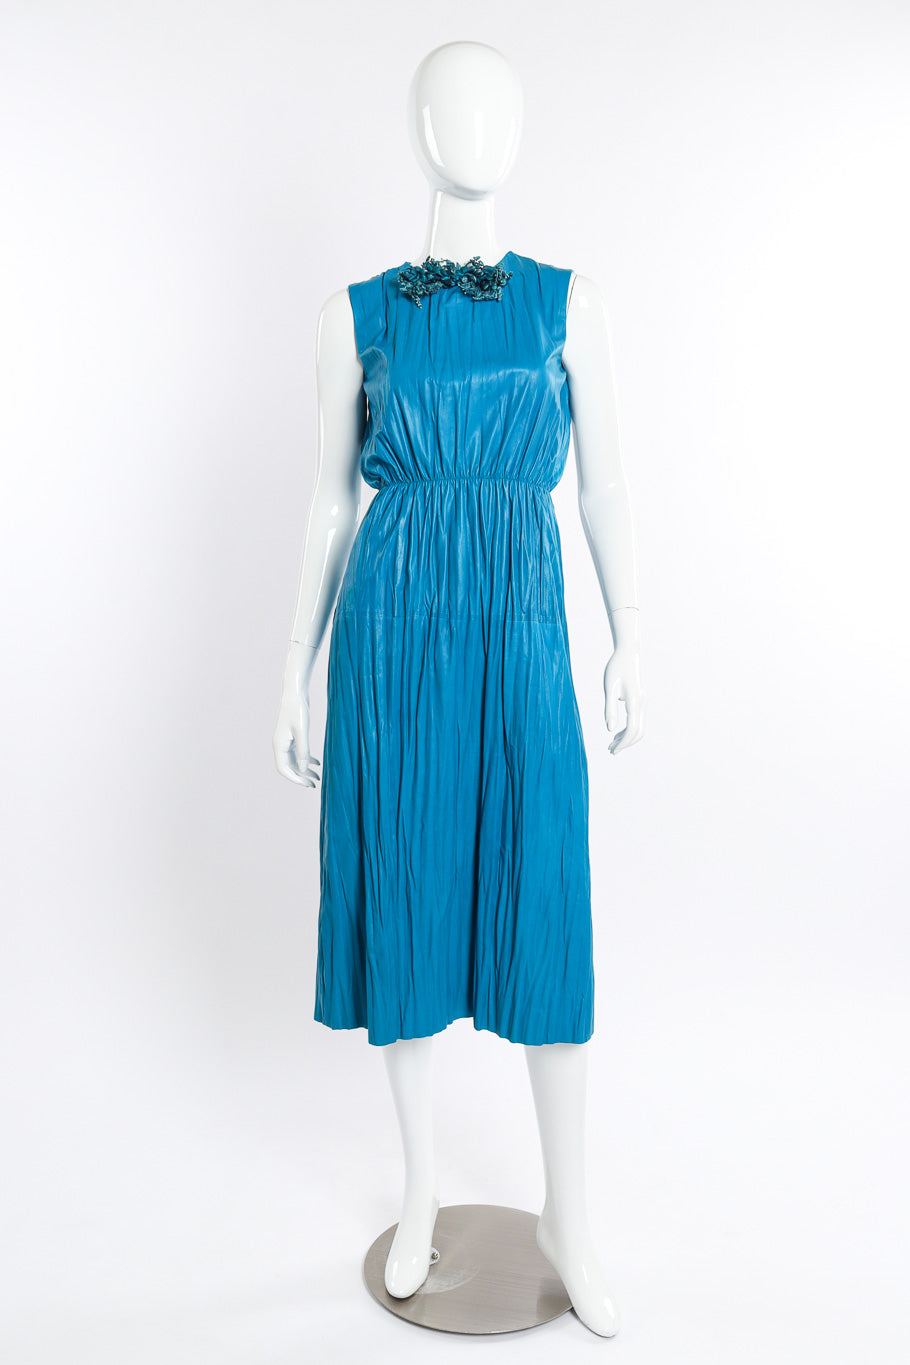 Gucci Sleeveless Pleated Leather Dress front on mannequin @recessla